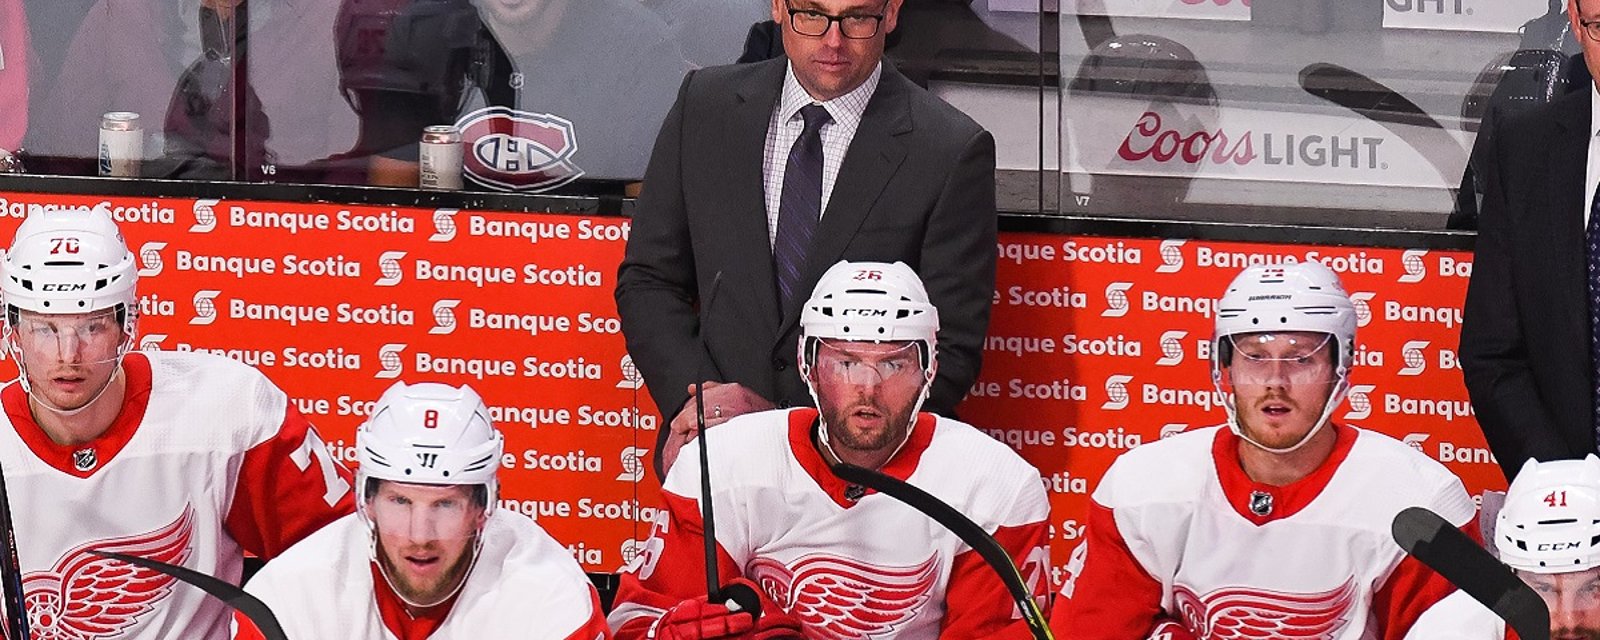 Rumor: Issues with Jeff Blashill may land Wings forward on the trading block.